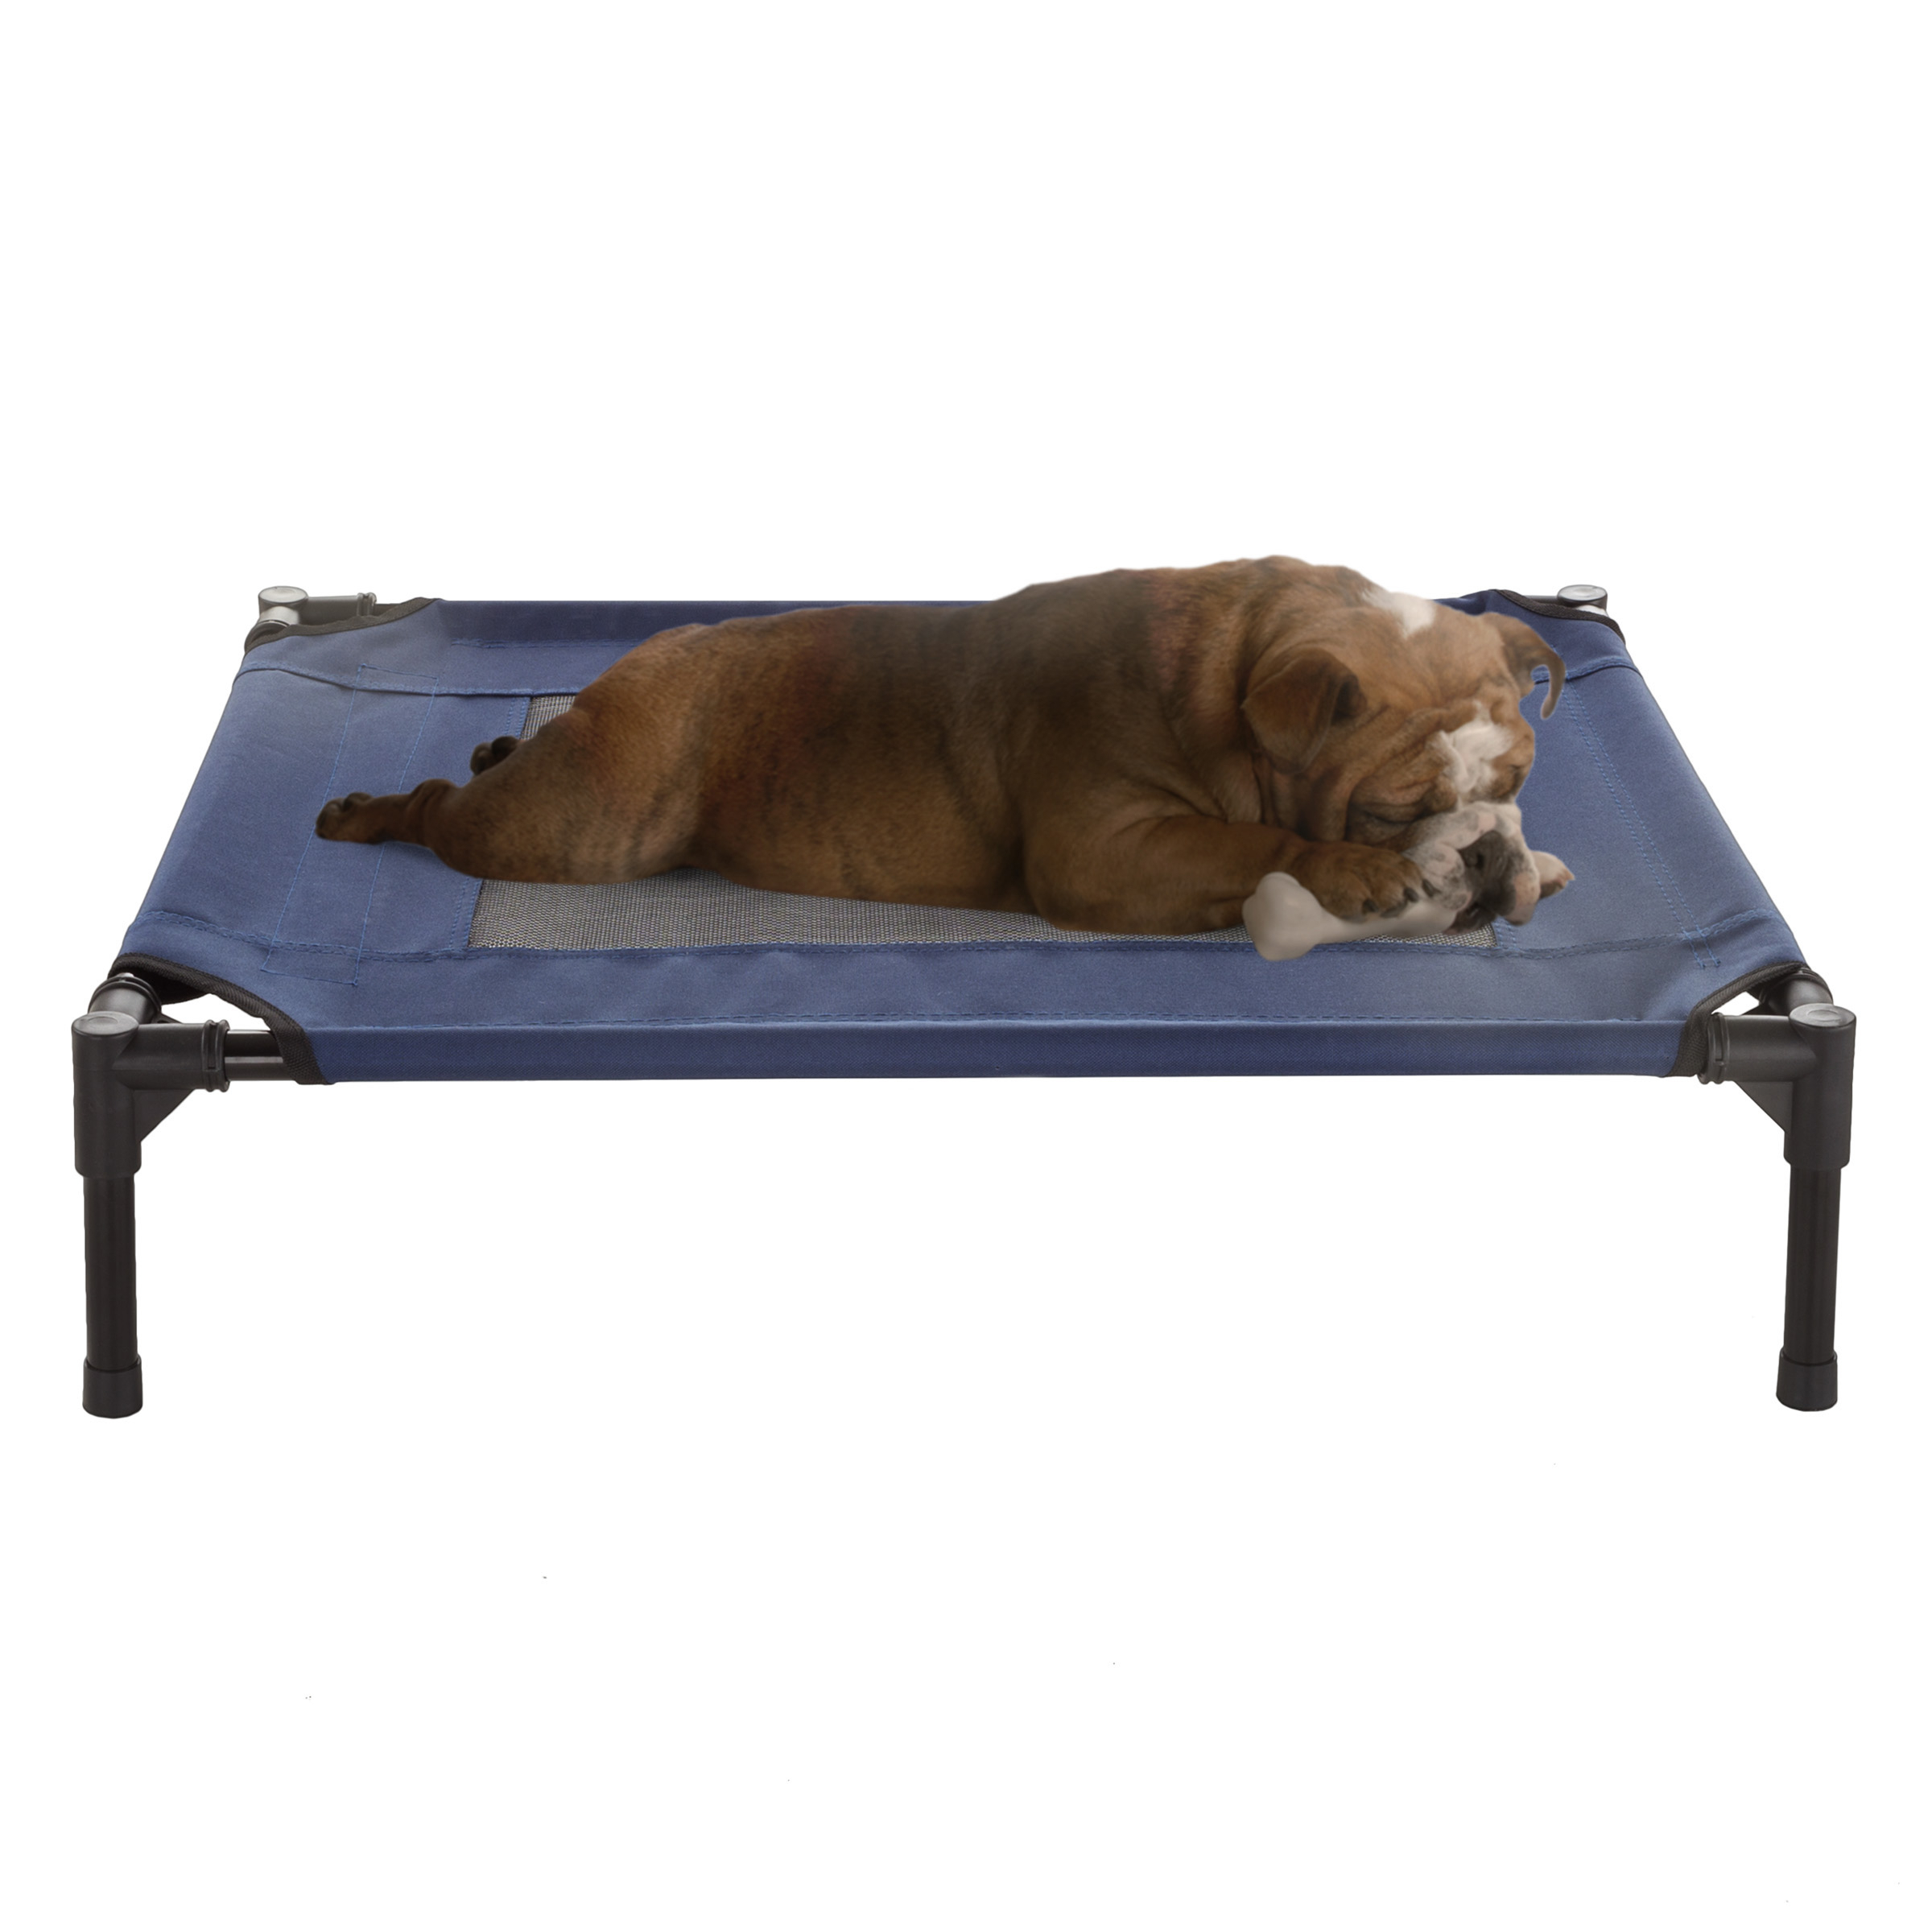 Small Med Dog Cat Bed Indoor Outdoor Raised Elevated Cot 30 X 24 Inch Camping Travel